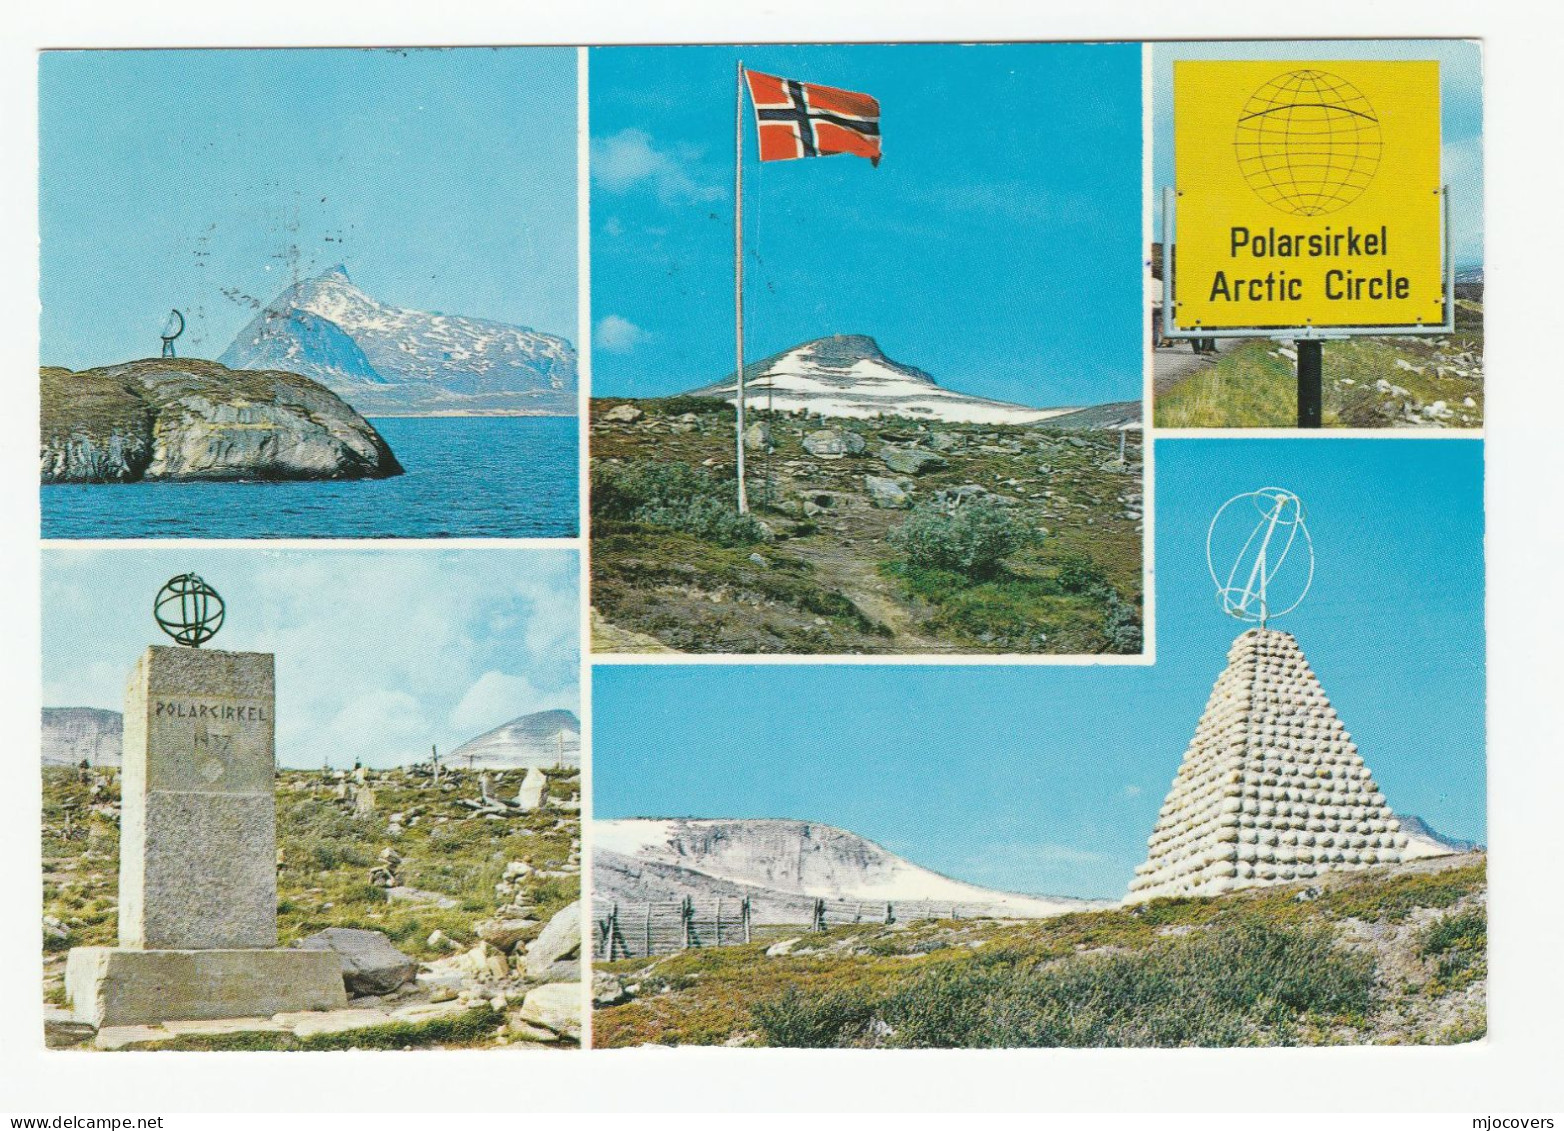 Polarsirkelen ARCTIC CIRCLE Norway 1974 Postcard To Germany Cover Stamps Polar - Expéditions Arctiques